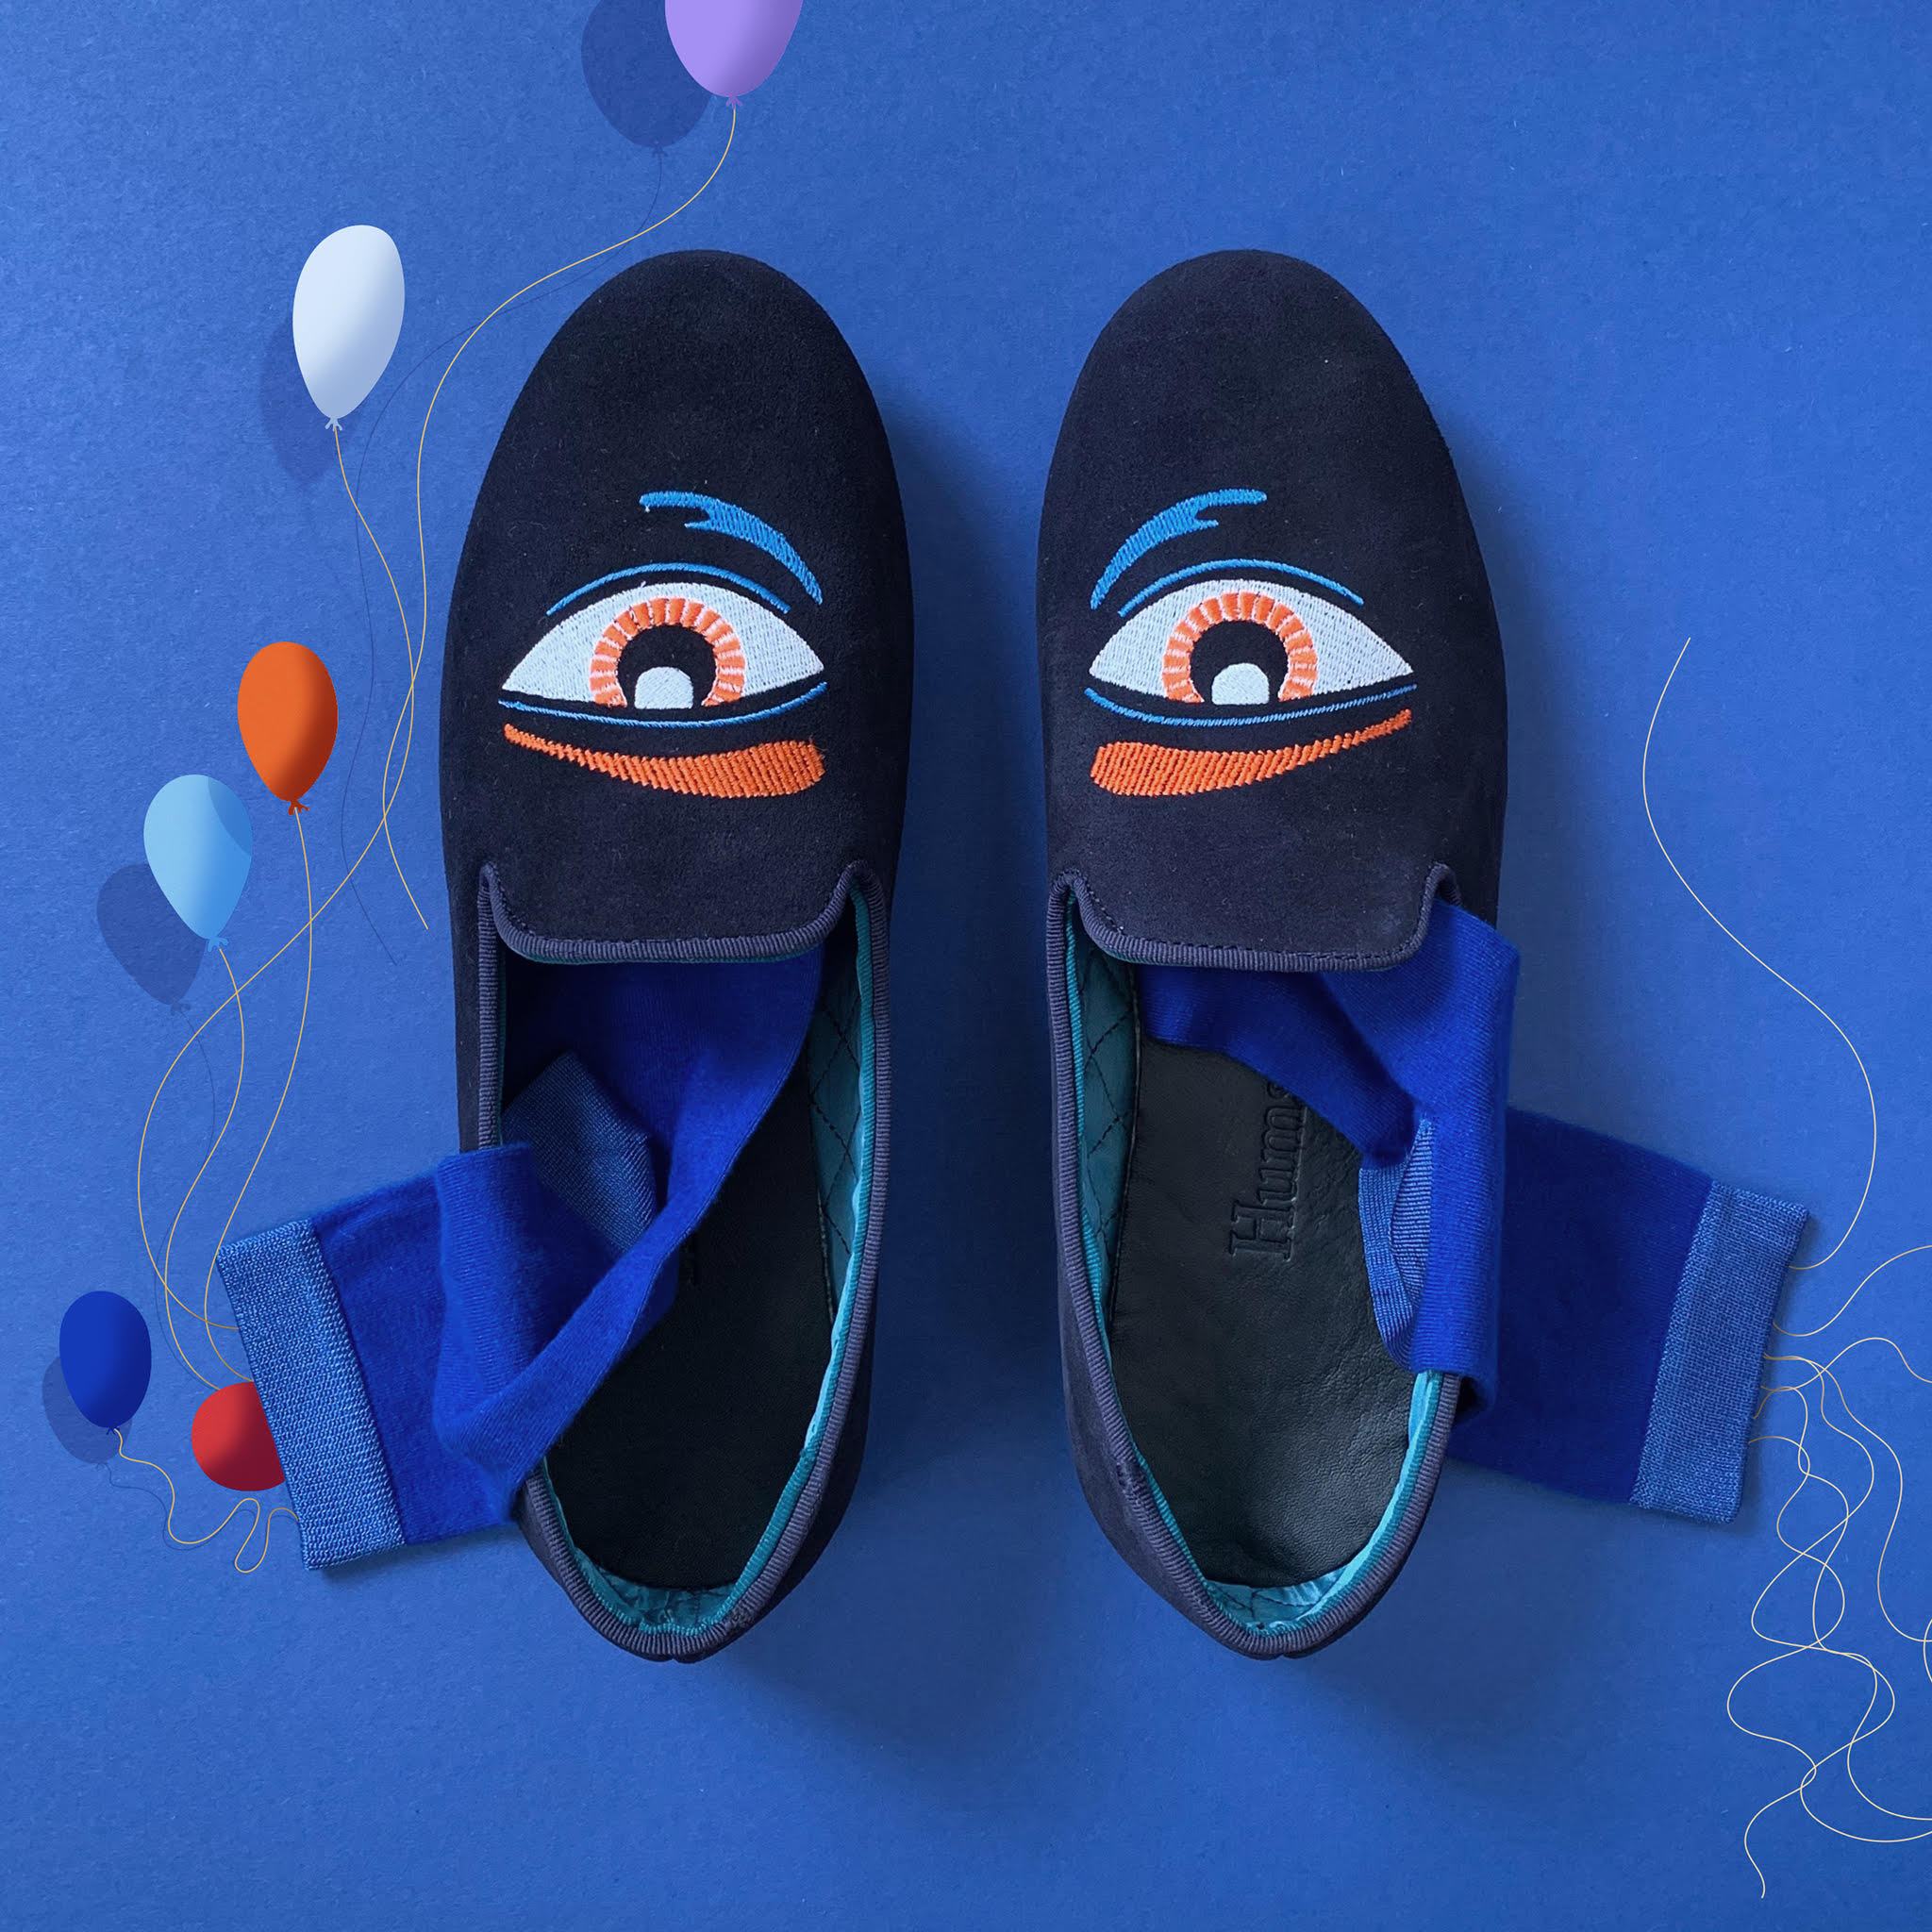 Hums Eye Talisman Loafer - Hums Slippers